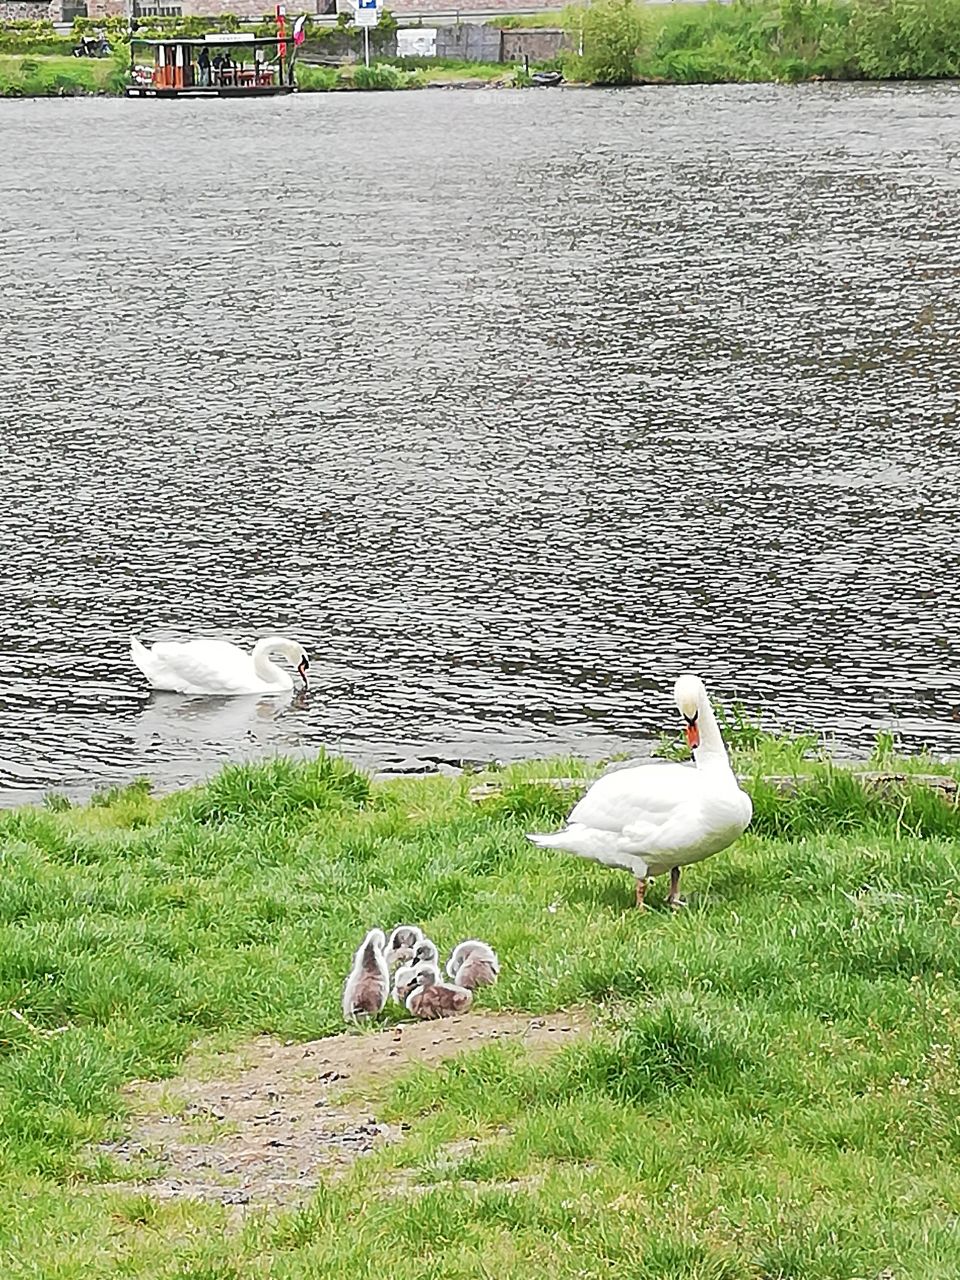 Swans and signets on Vltava River